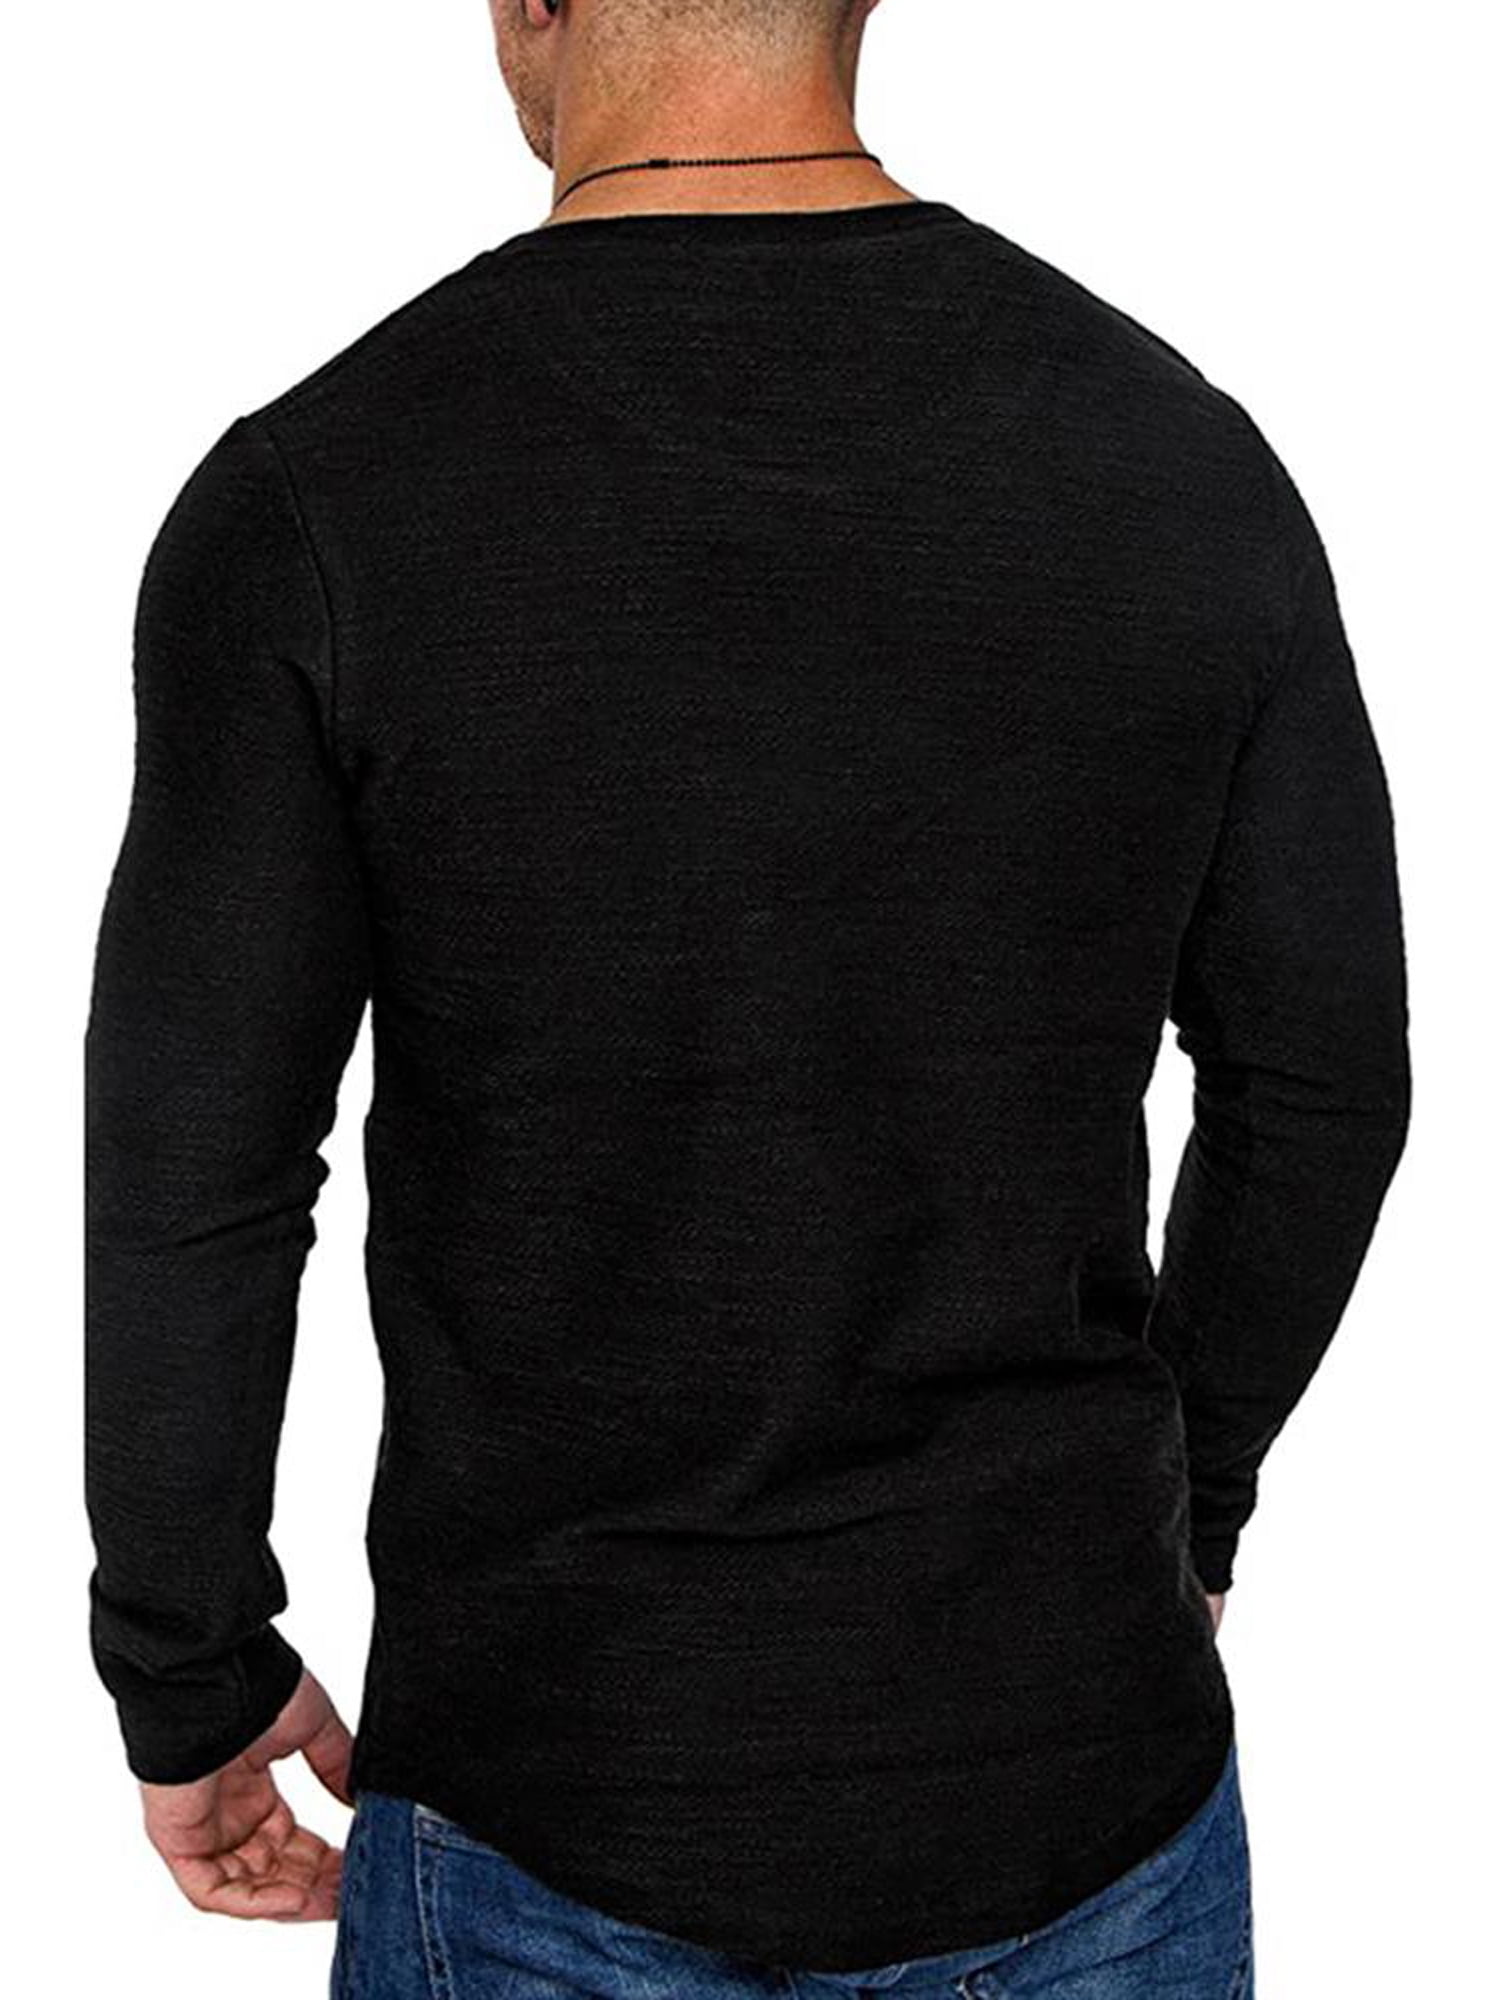 Mens Print Long Sleeve Crew Neck T-Shirts Casual Slim Fit Muscle Tops Blouse US